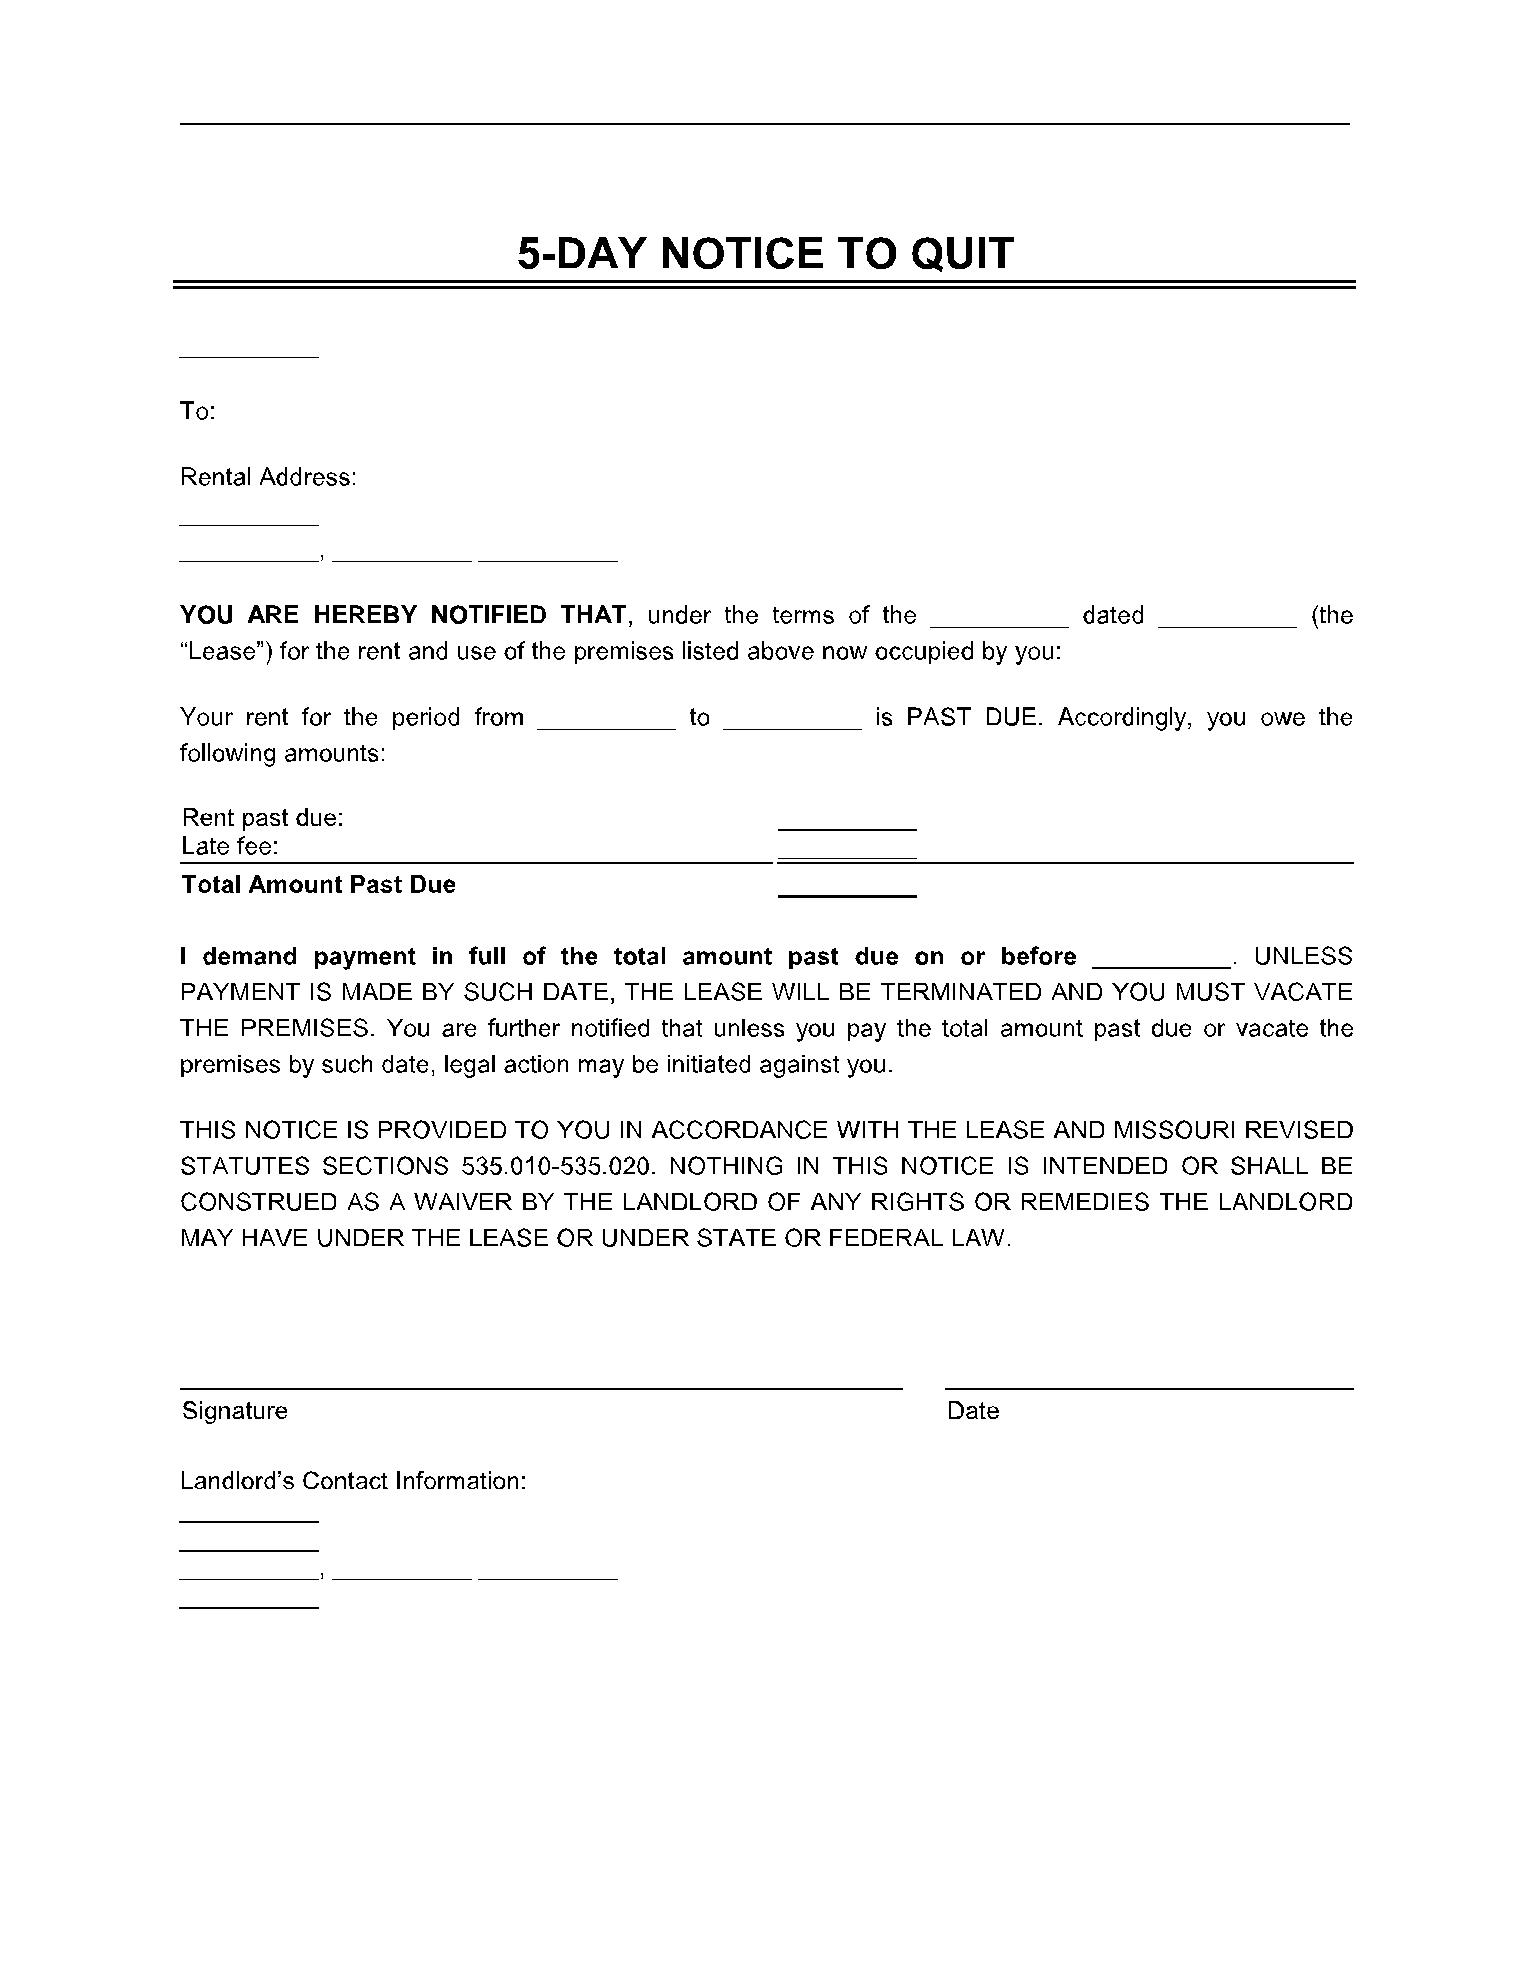 5-Day Notice to Quit Form